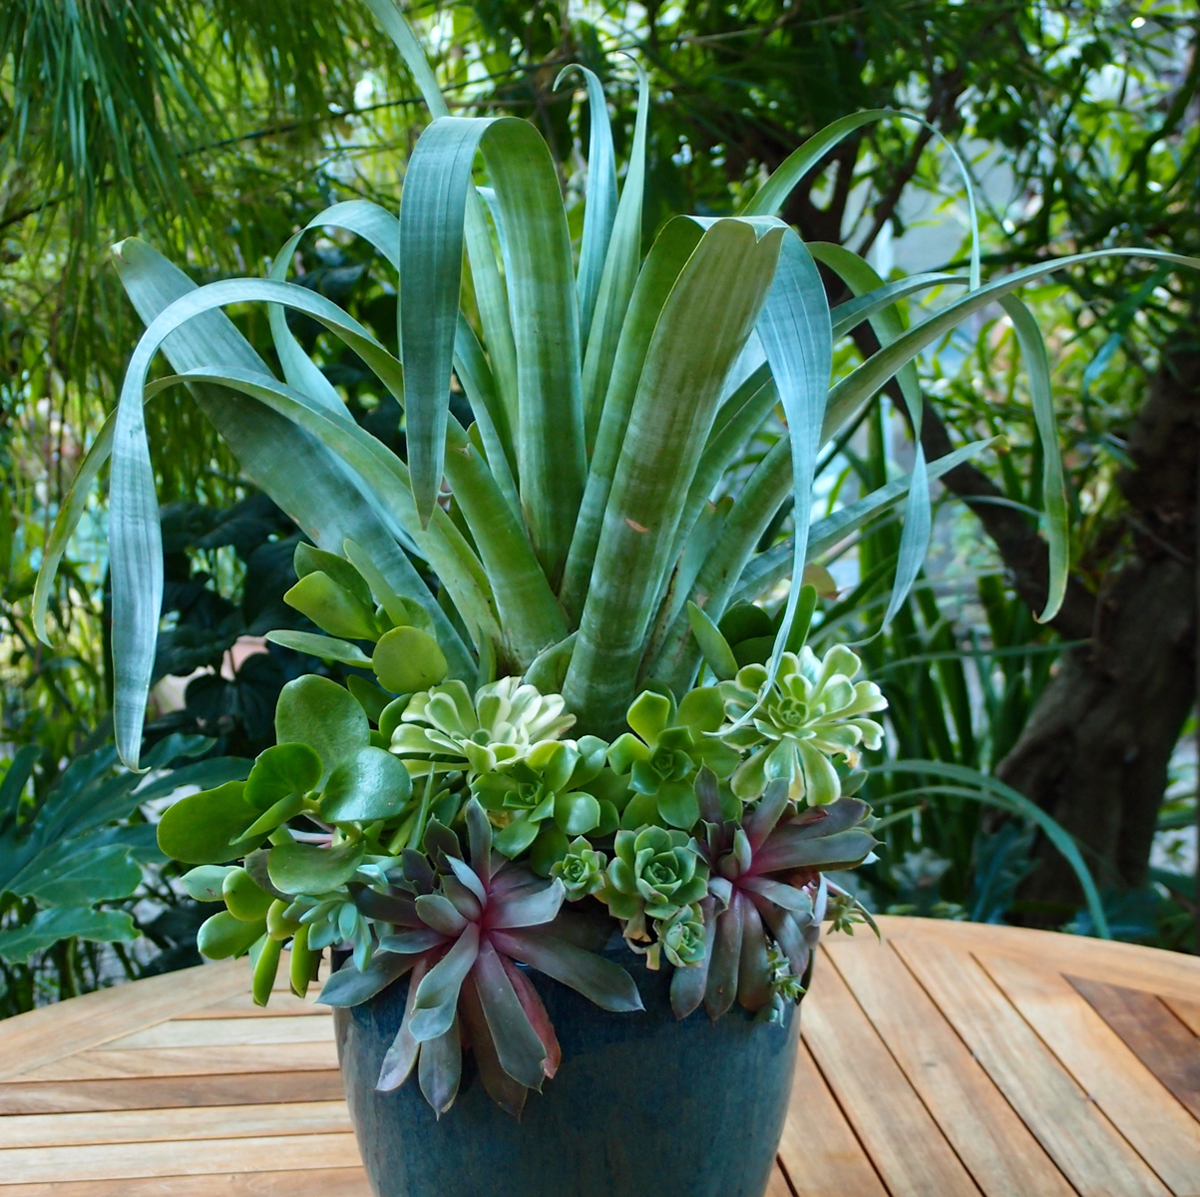 Bromeliad and a variety of succulents (aeoniums, sedums)